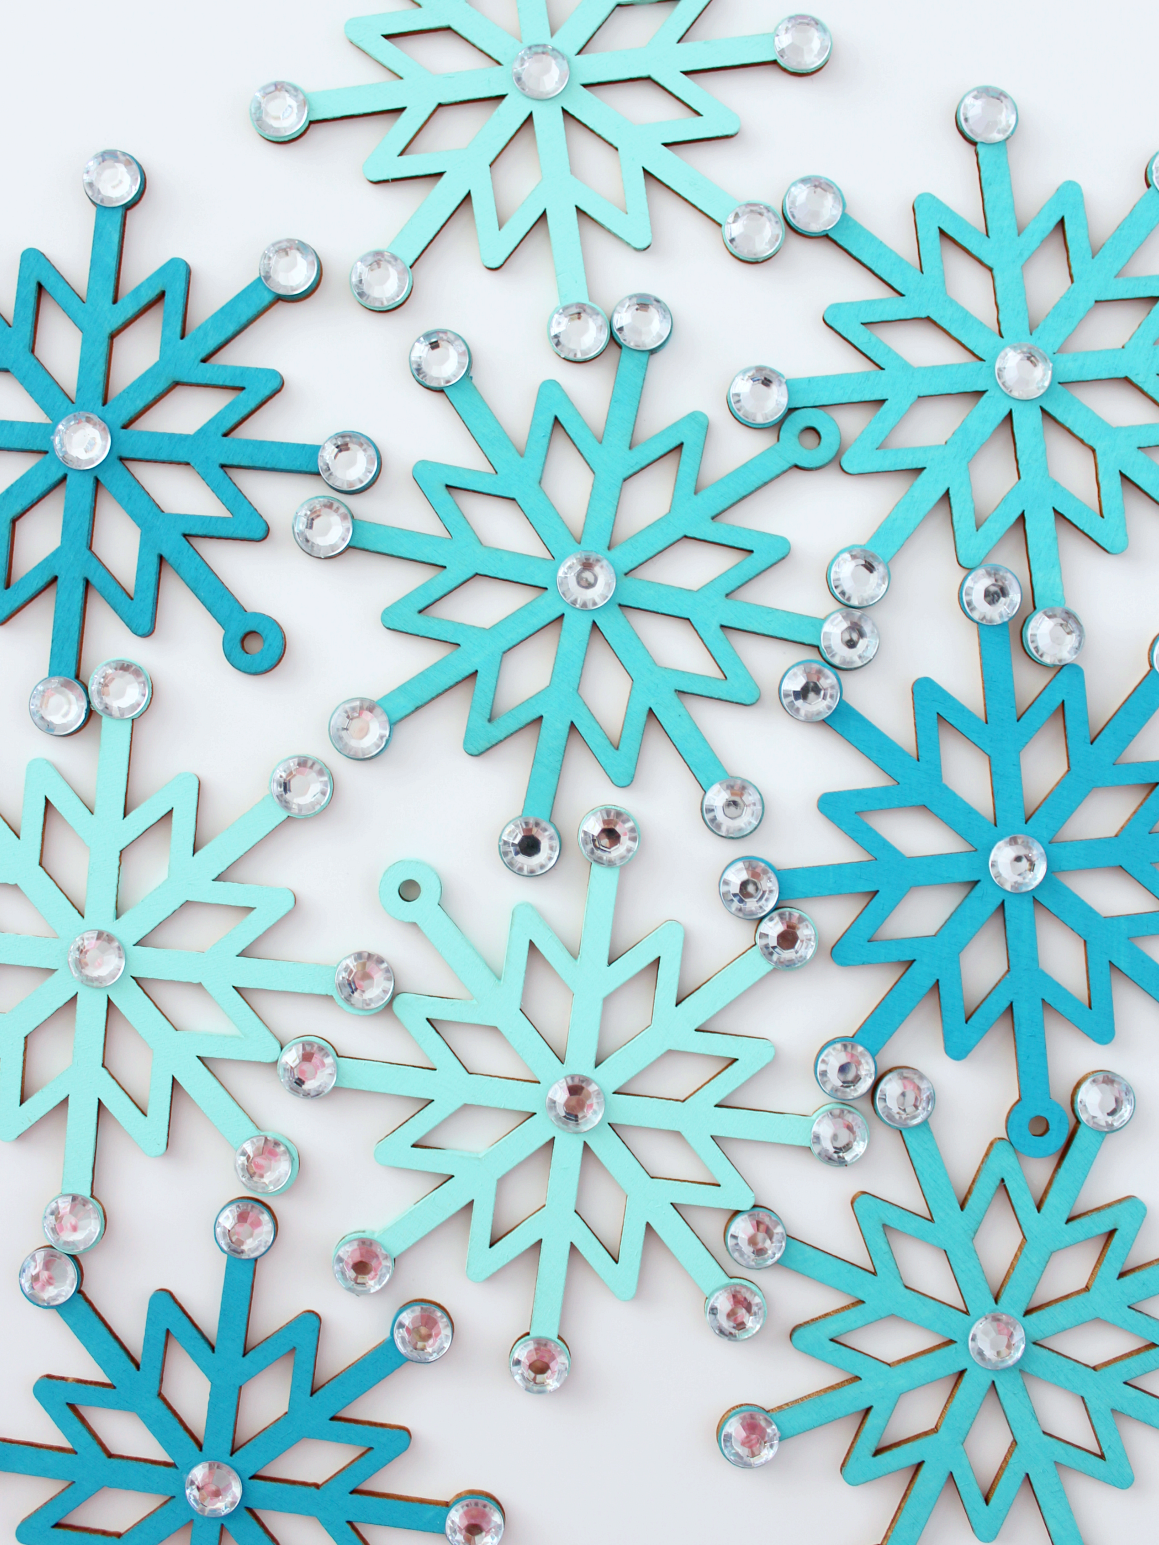 10 Homemade Snowflake Decorations or Snowflake Crafts That Go